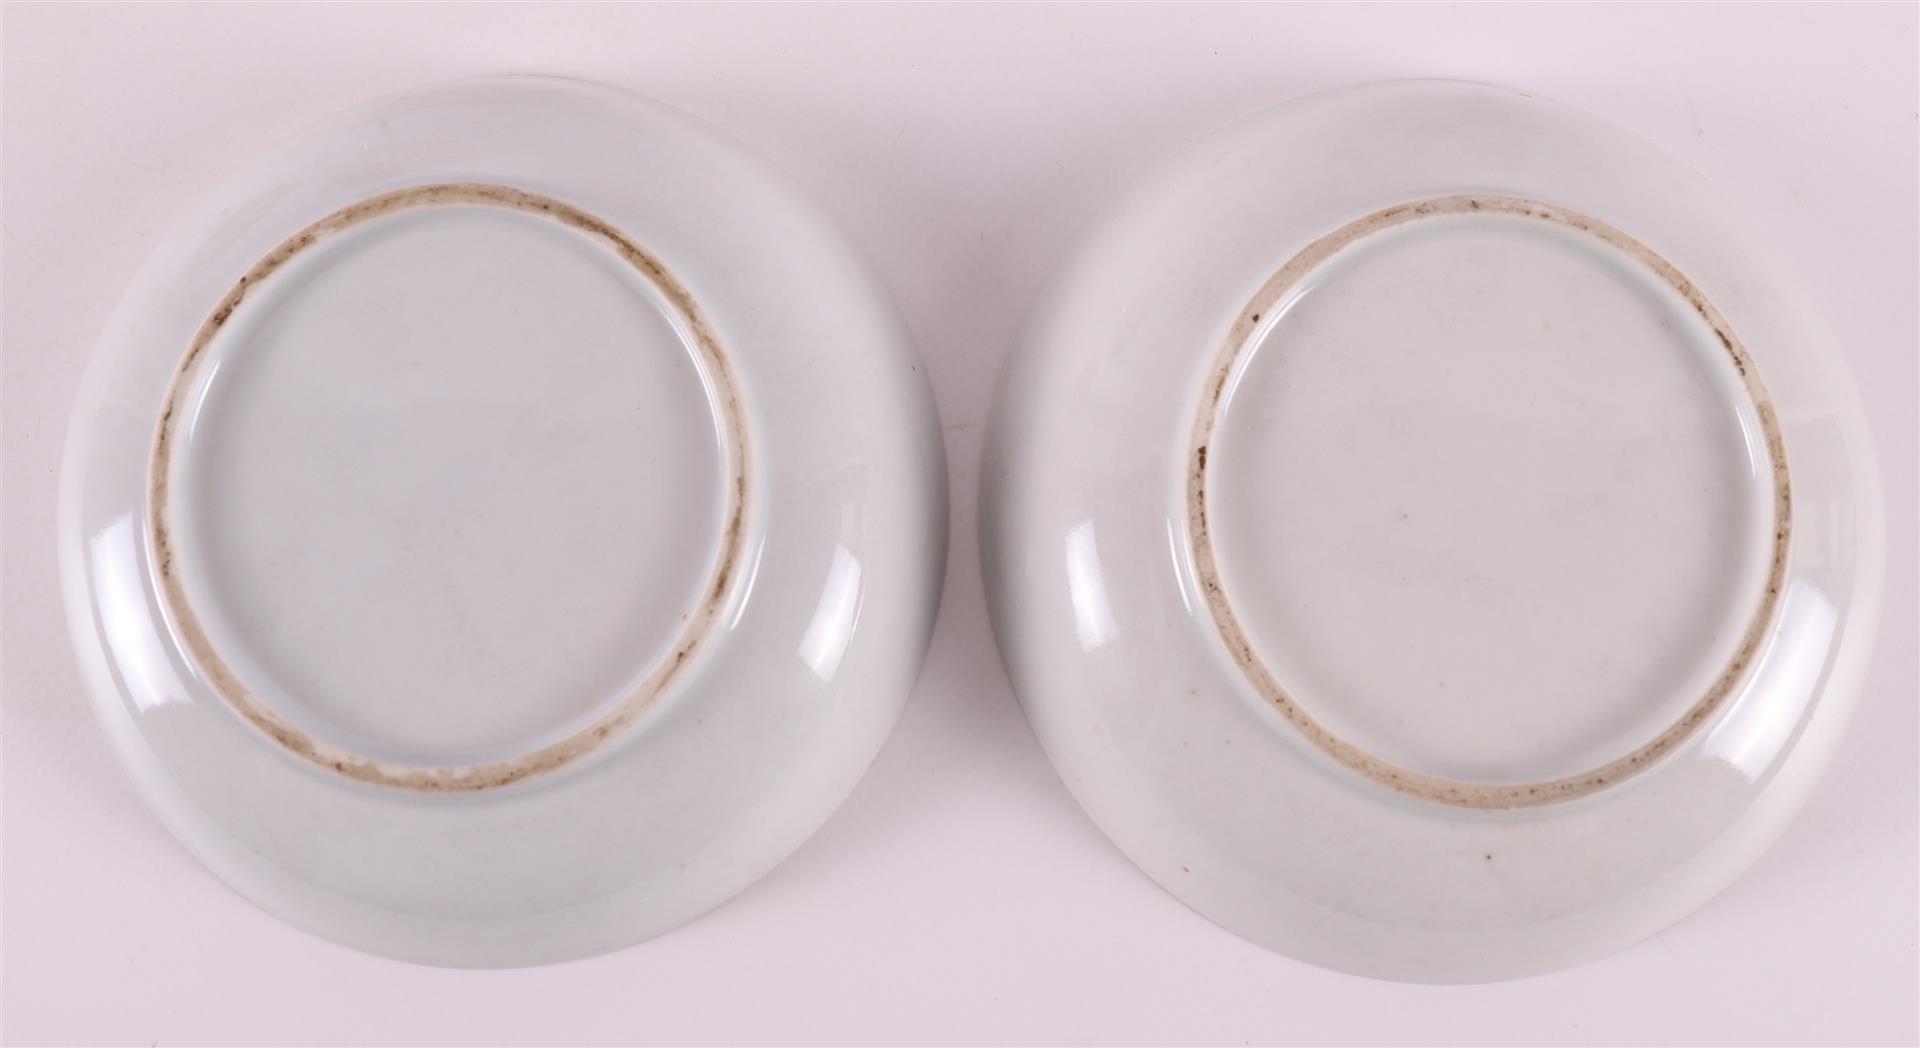 Two porcelain famille rose mandarin cups and saucers, 19th century. - Image 4 of 10